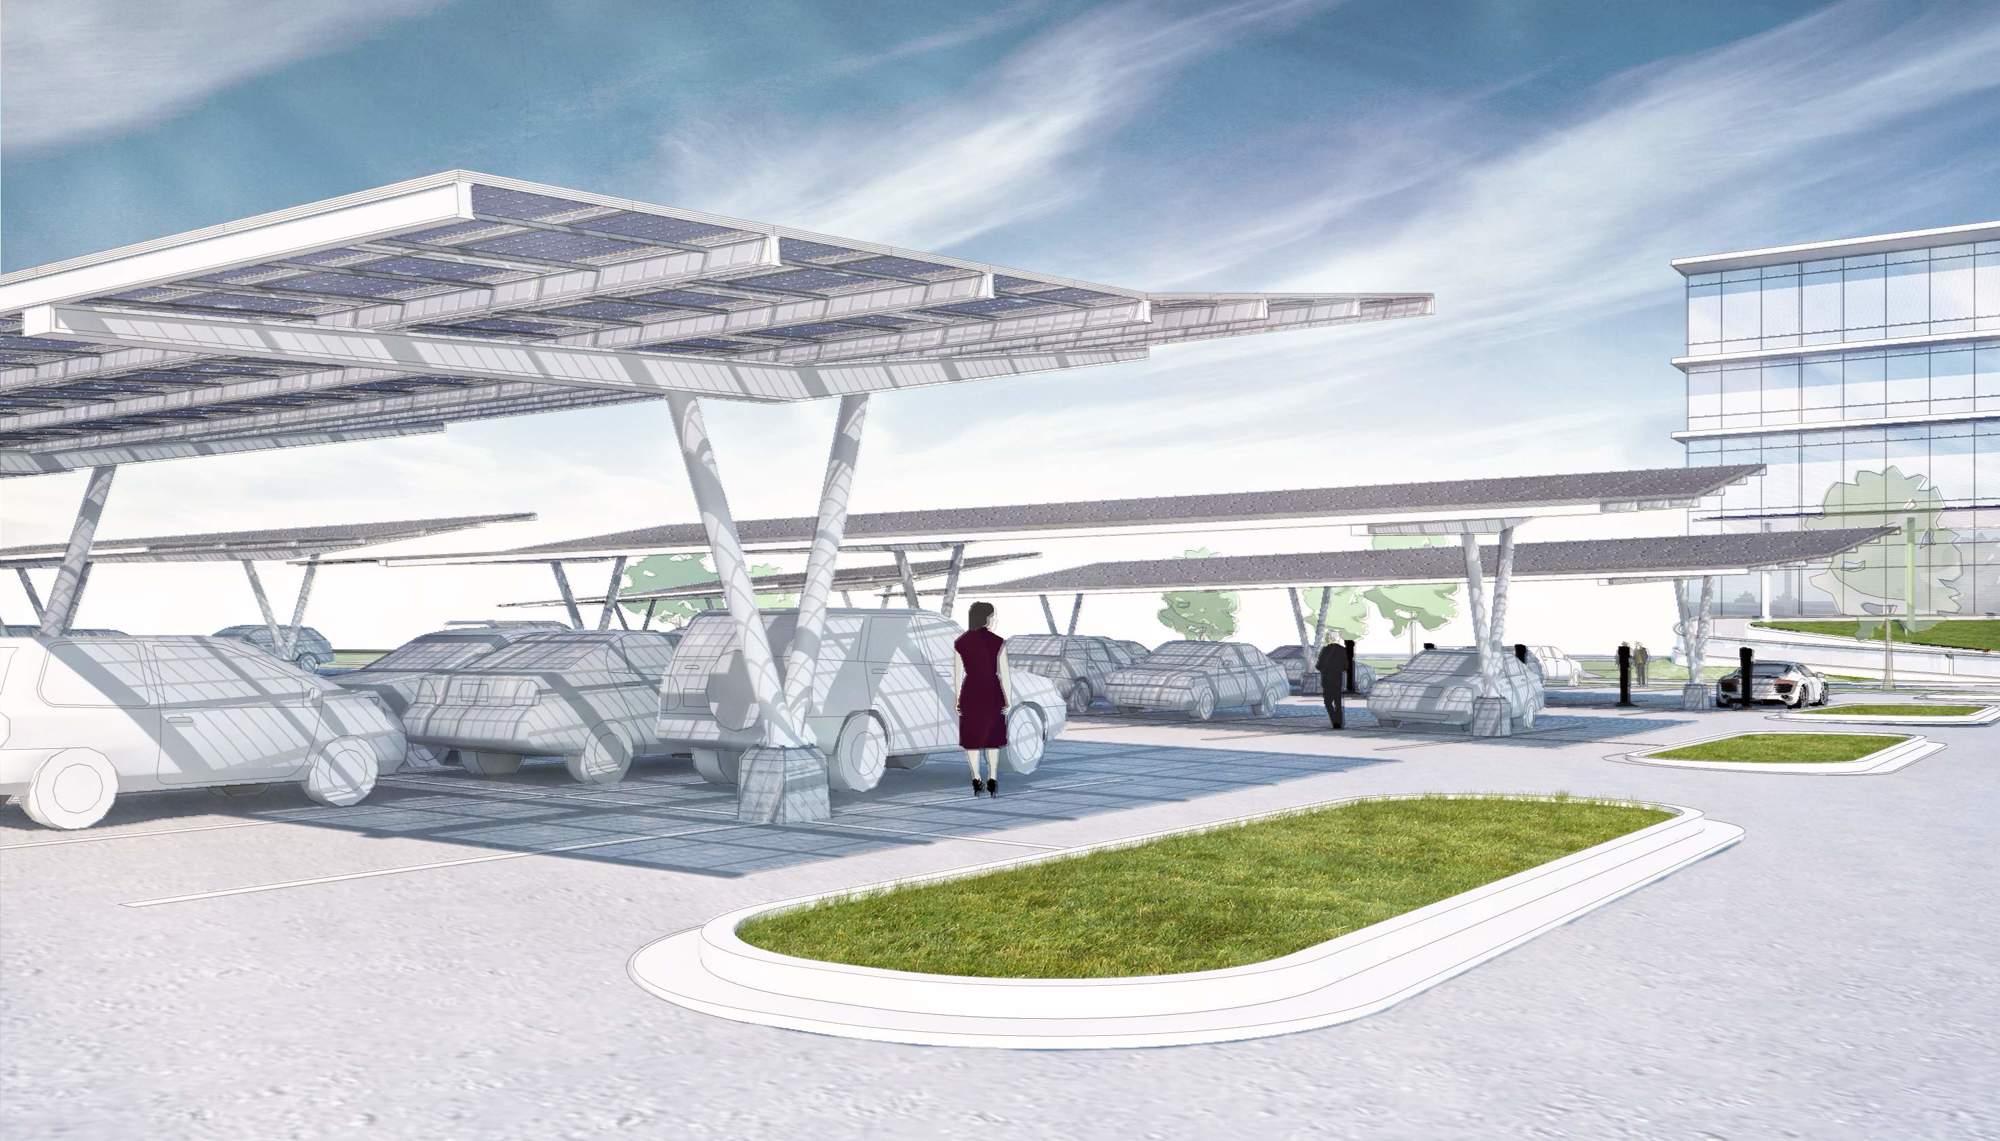 It will cost $3.33 million to add solar panels five carports, according to building permits issued Wednesday.